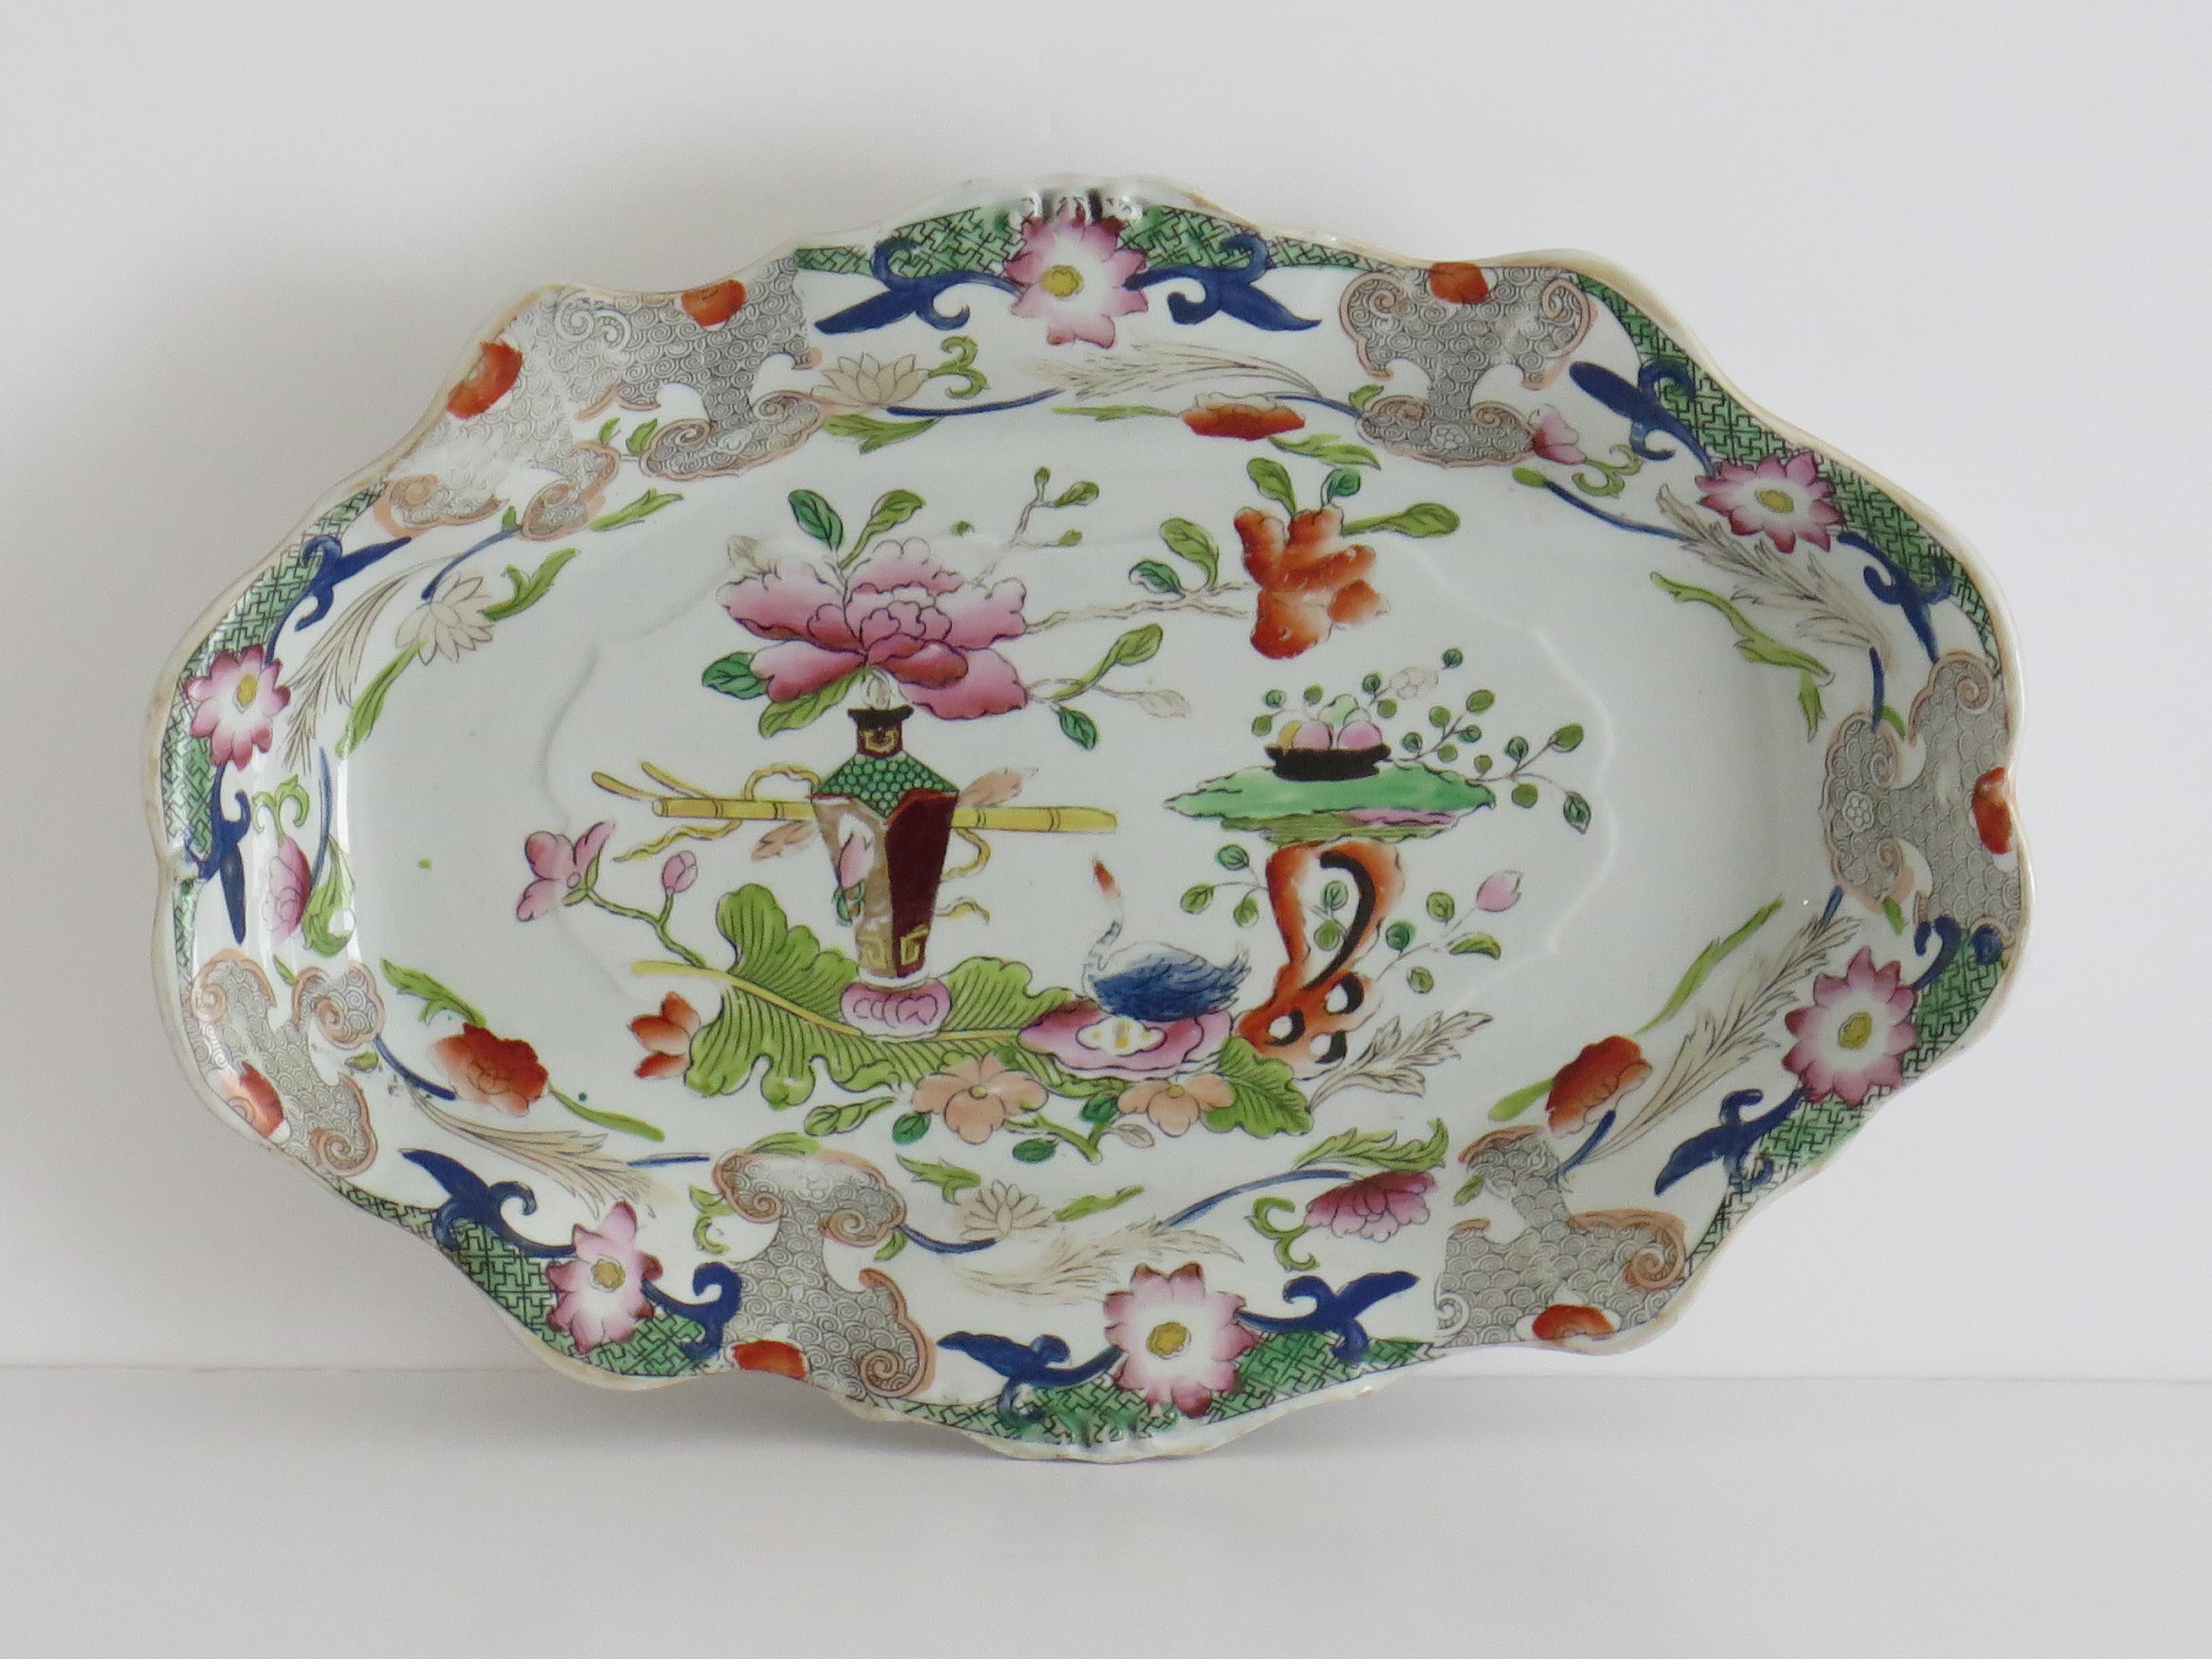 This is a very good hand painted Mason's ironstone large Desert Dish, in the table and flowerpot gilded pattern, from their earliest George IIIrd period, circa 1818.

The piece is well potted with an oval shape having moulded wavy edges and standing